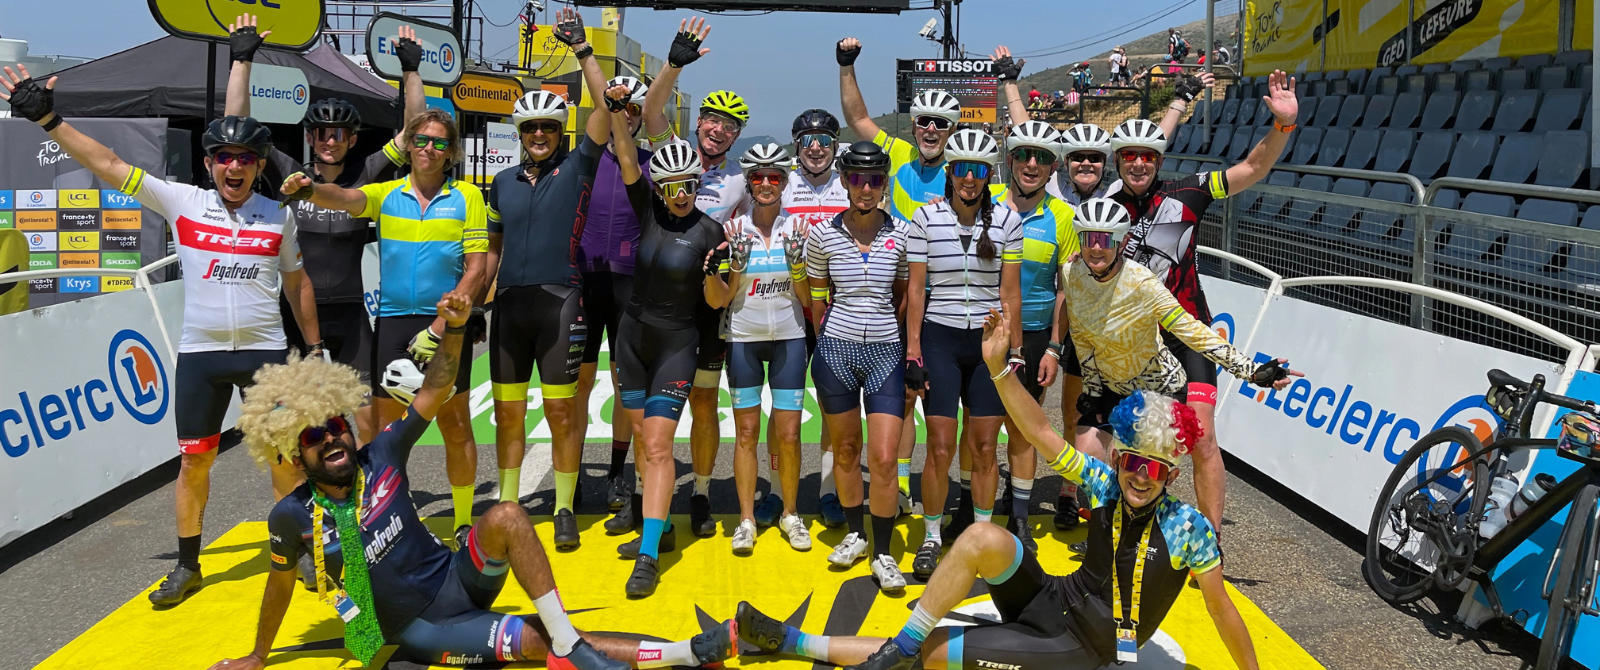 A group of people posing on the finish line of TDF